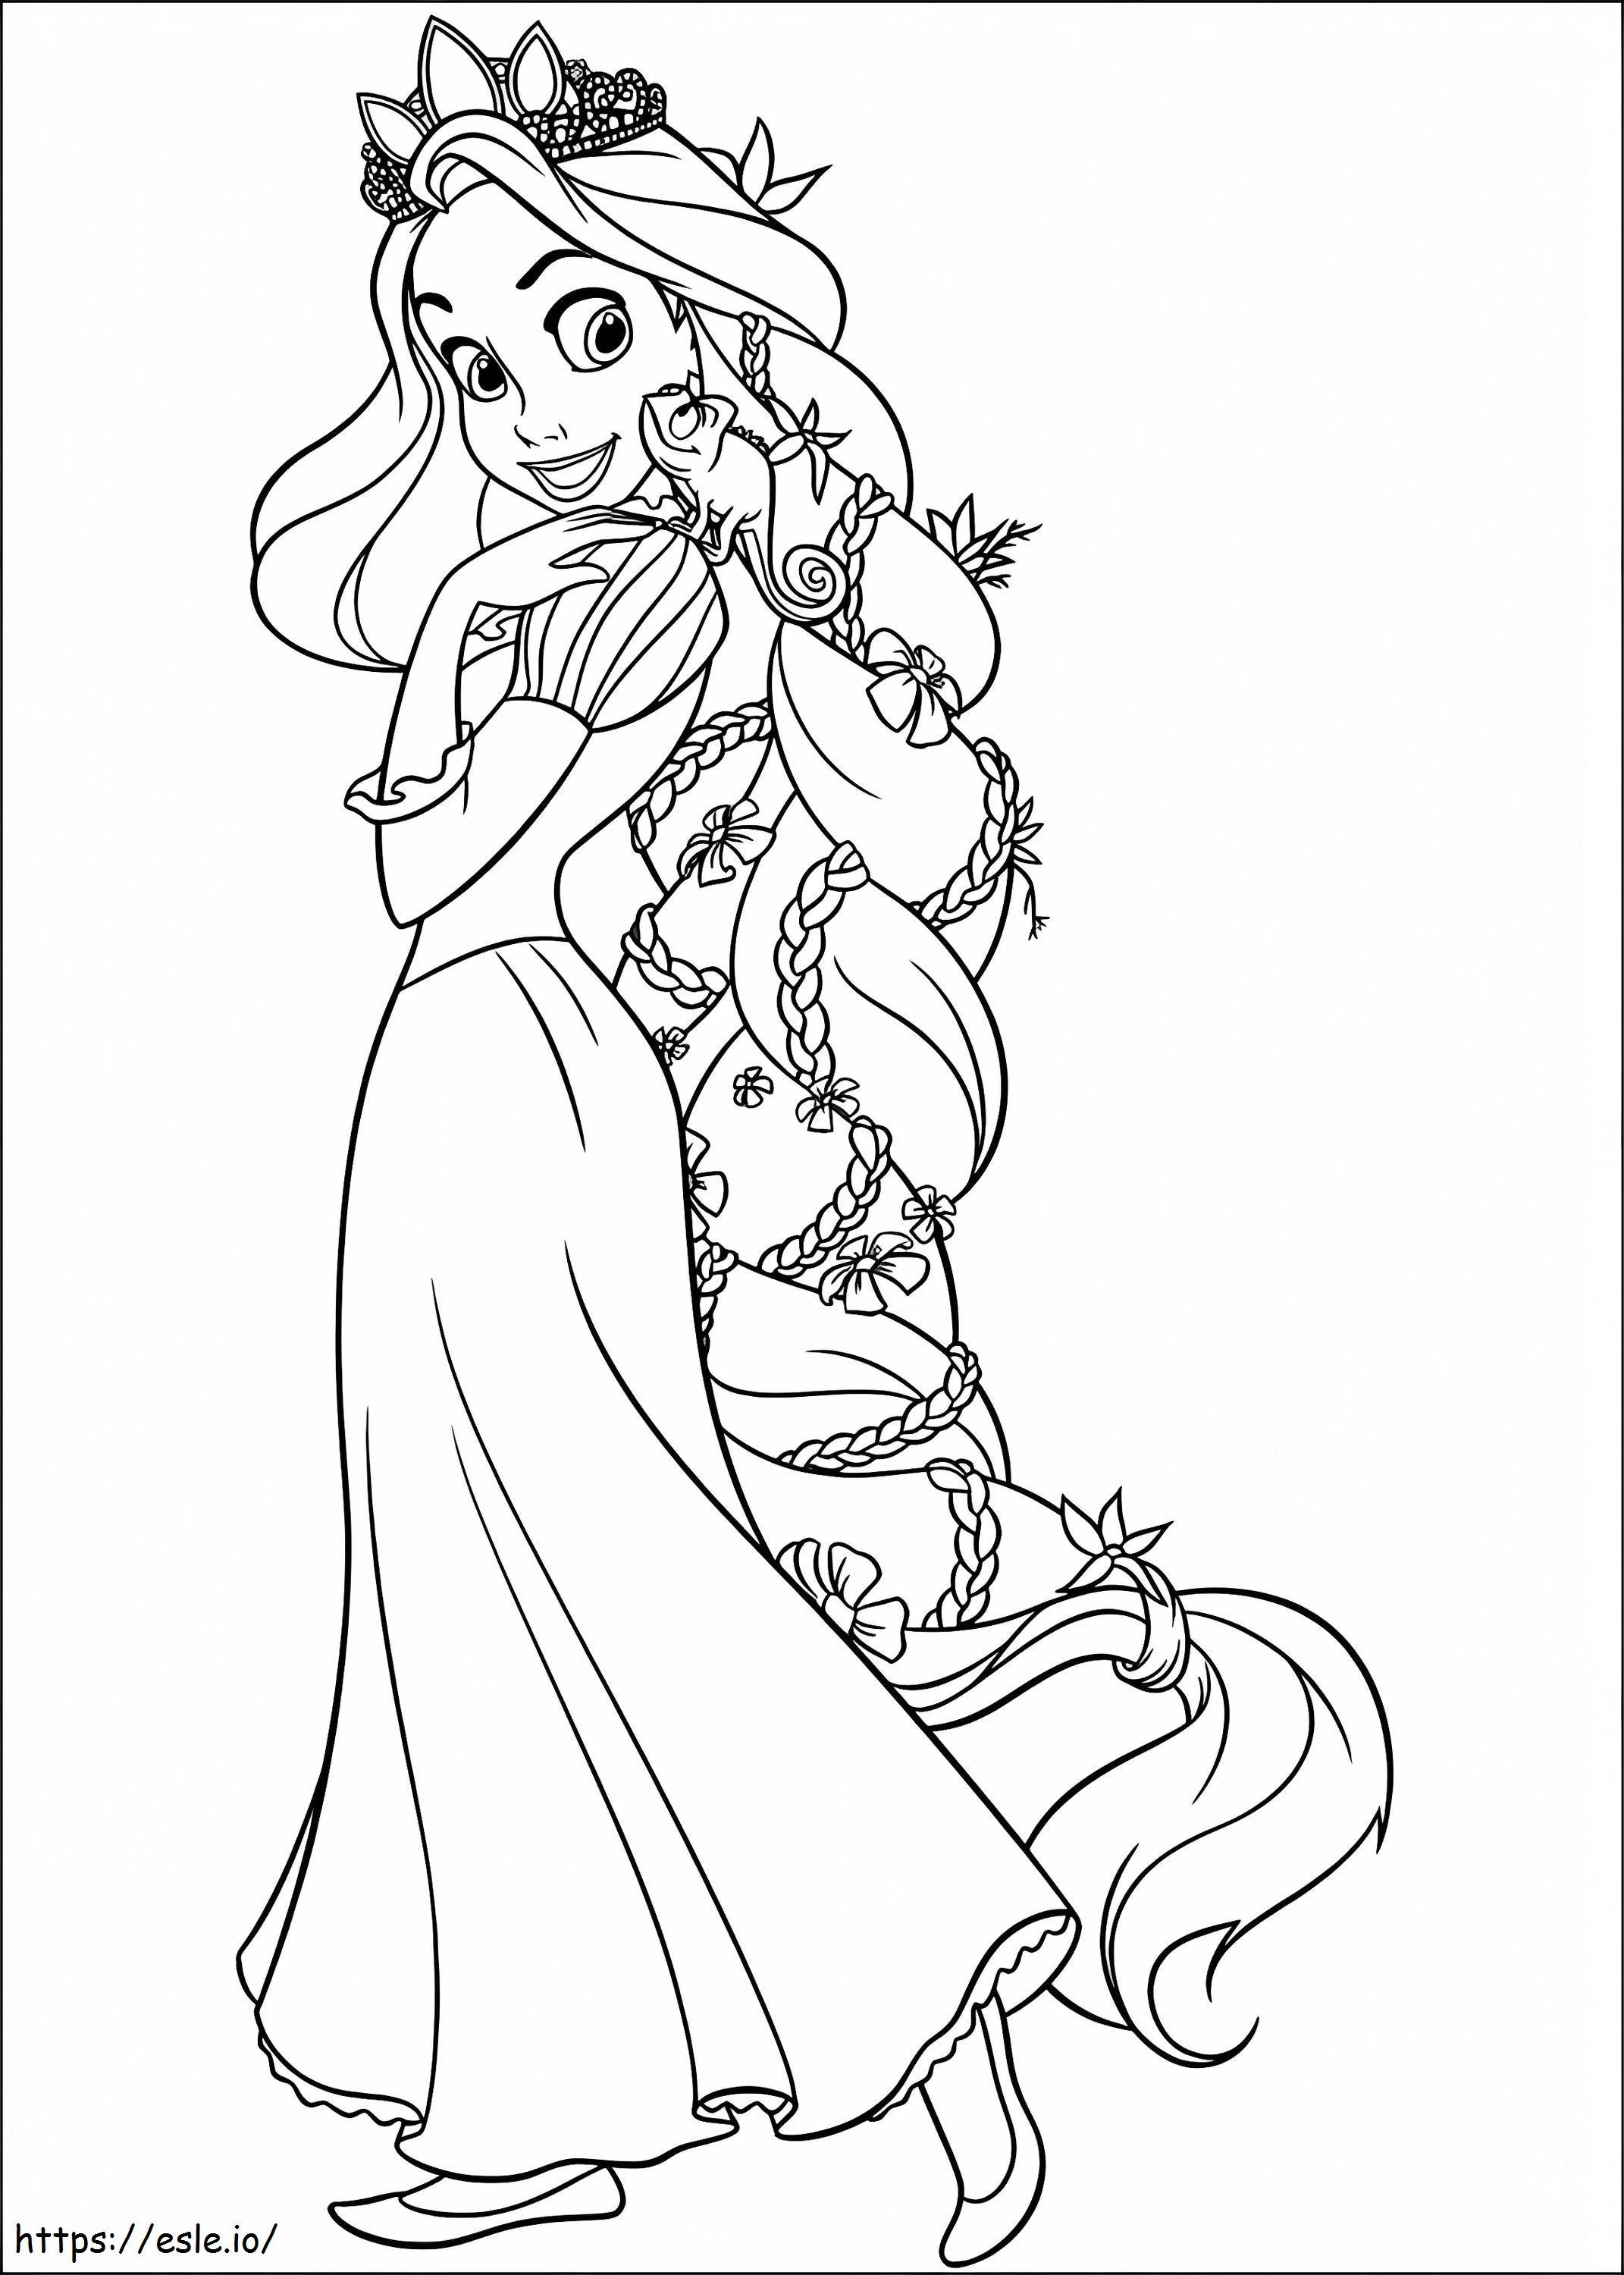 1530068069 28 coloring page